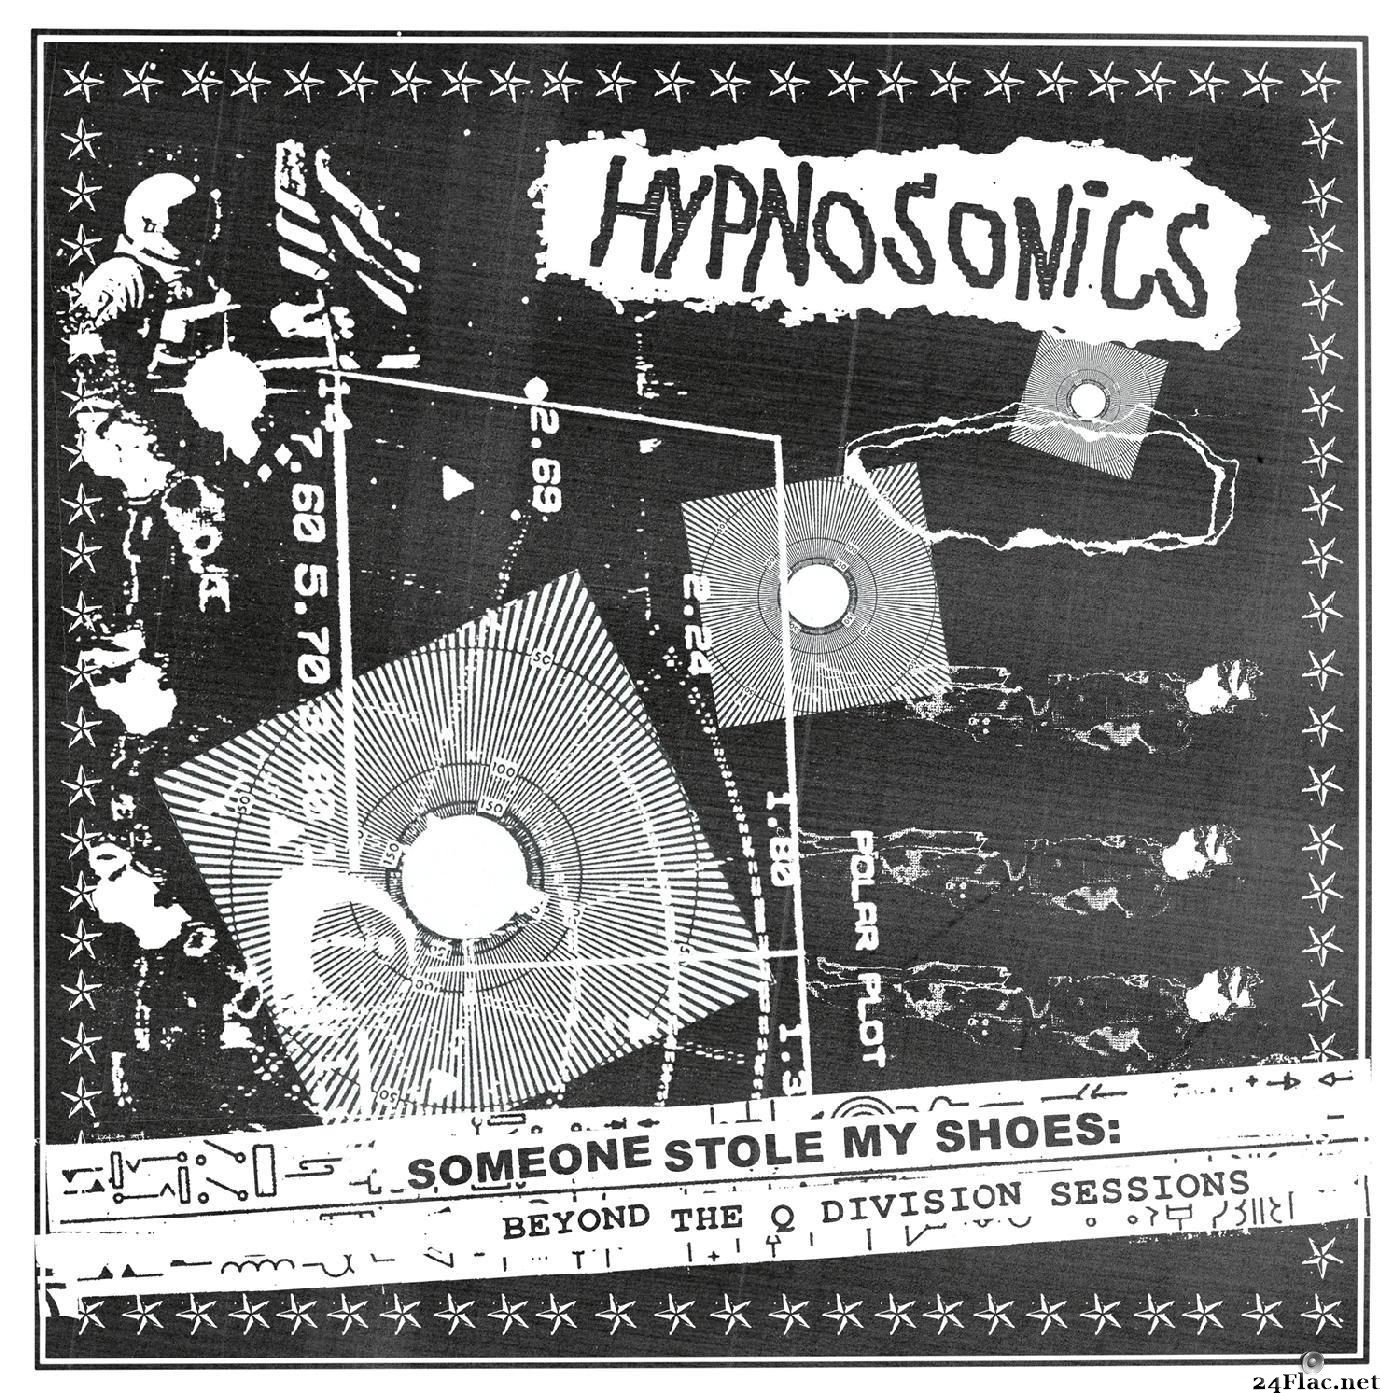 Hypnosonics - Someone Stole My Shoes: Beyond The Q Division Sessions (2021) Hi-Res